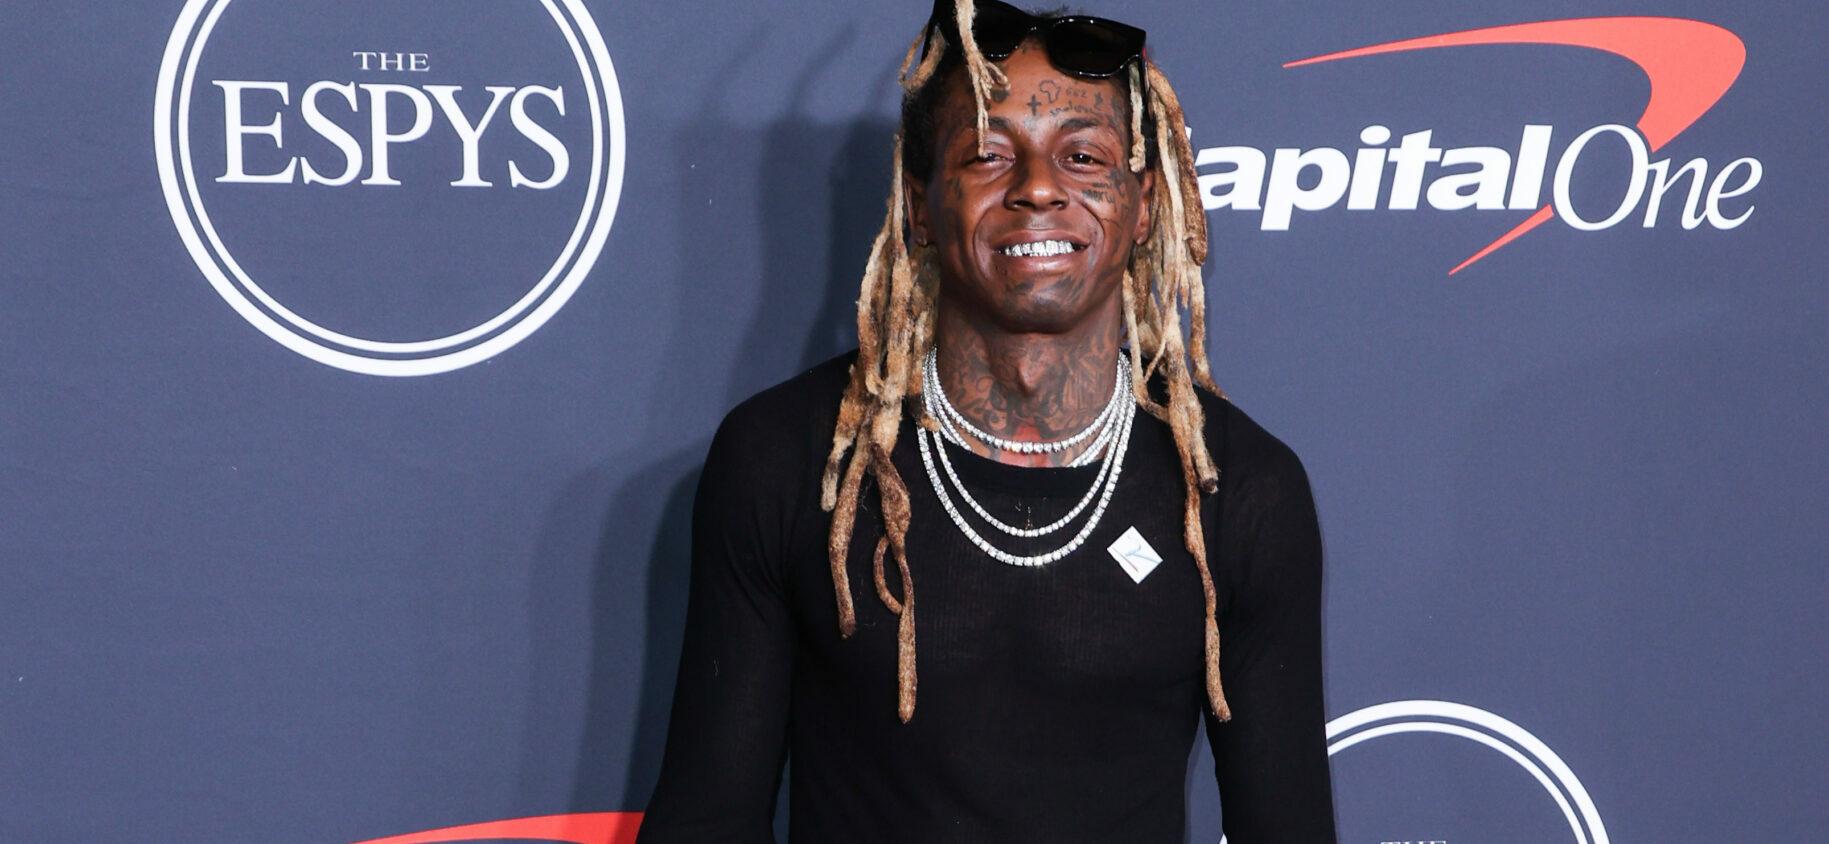 Rapper Lil’ Wayne Sued By His Former Private Chef For Discrimination